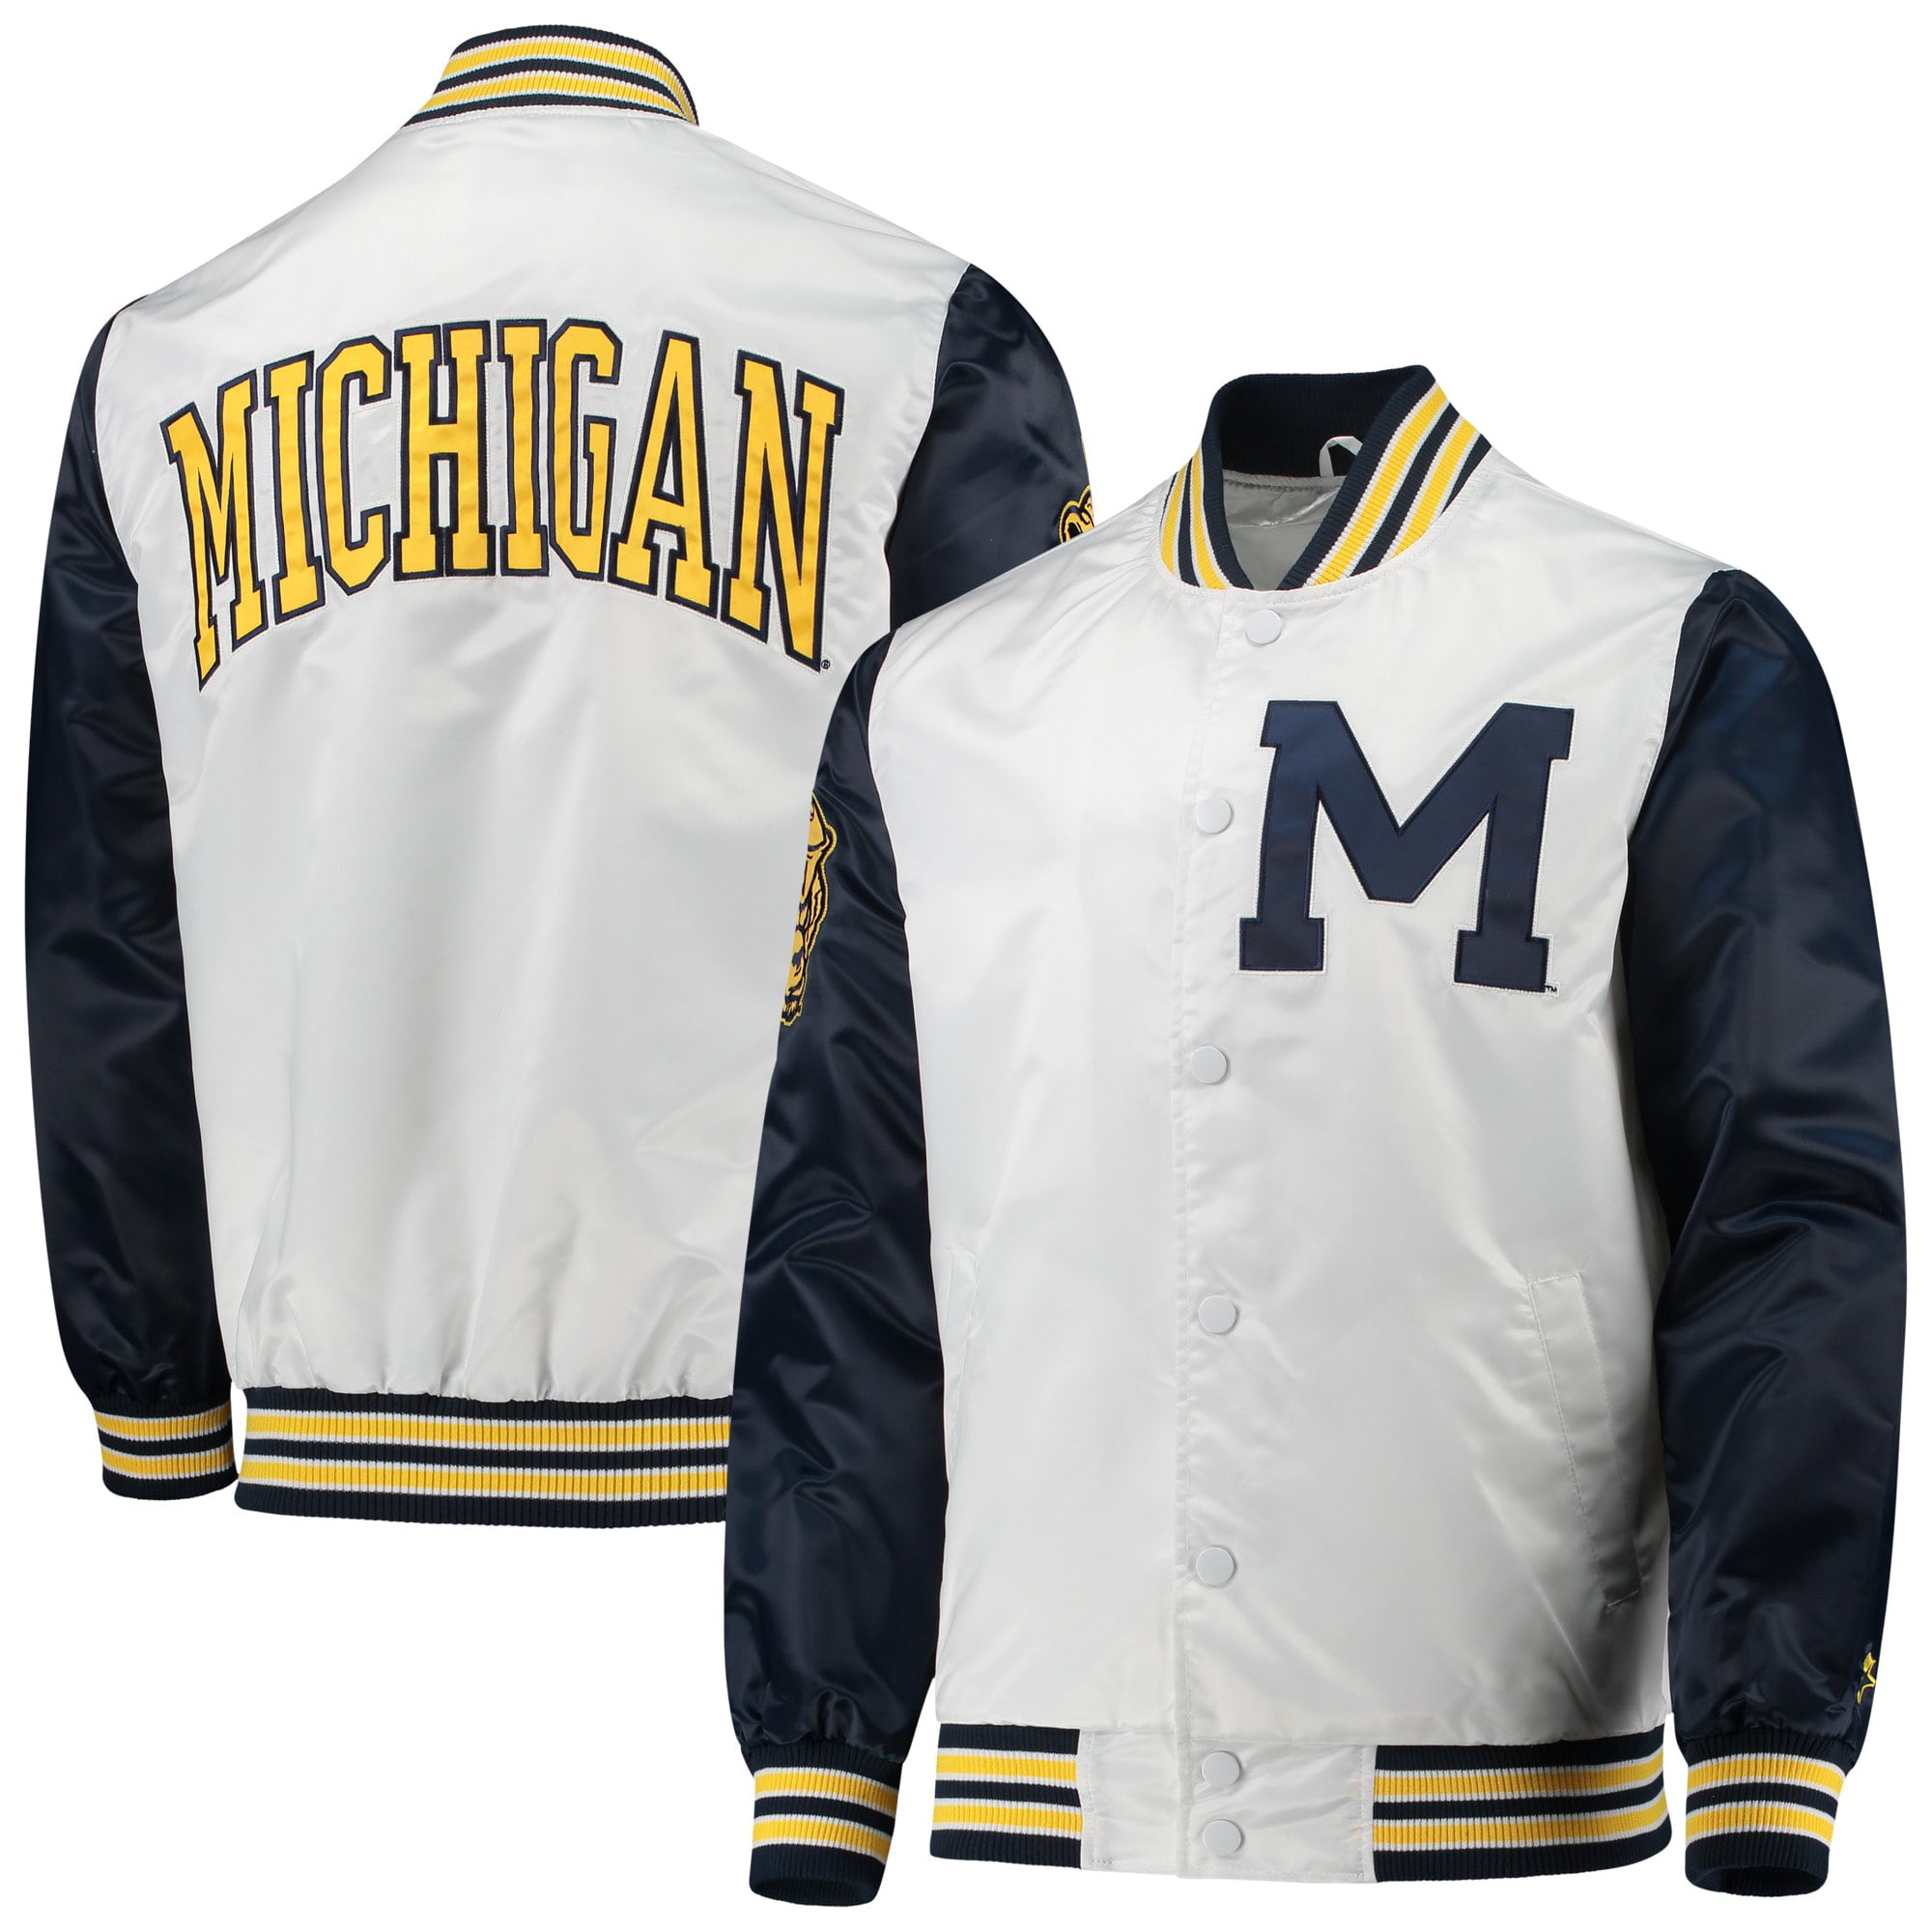 Michigan Wolverines Men's M XL Full-Zip Embroidered Leather Jacket NCAA L 